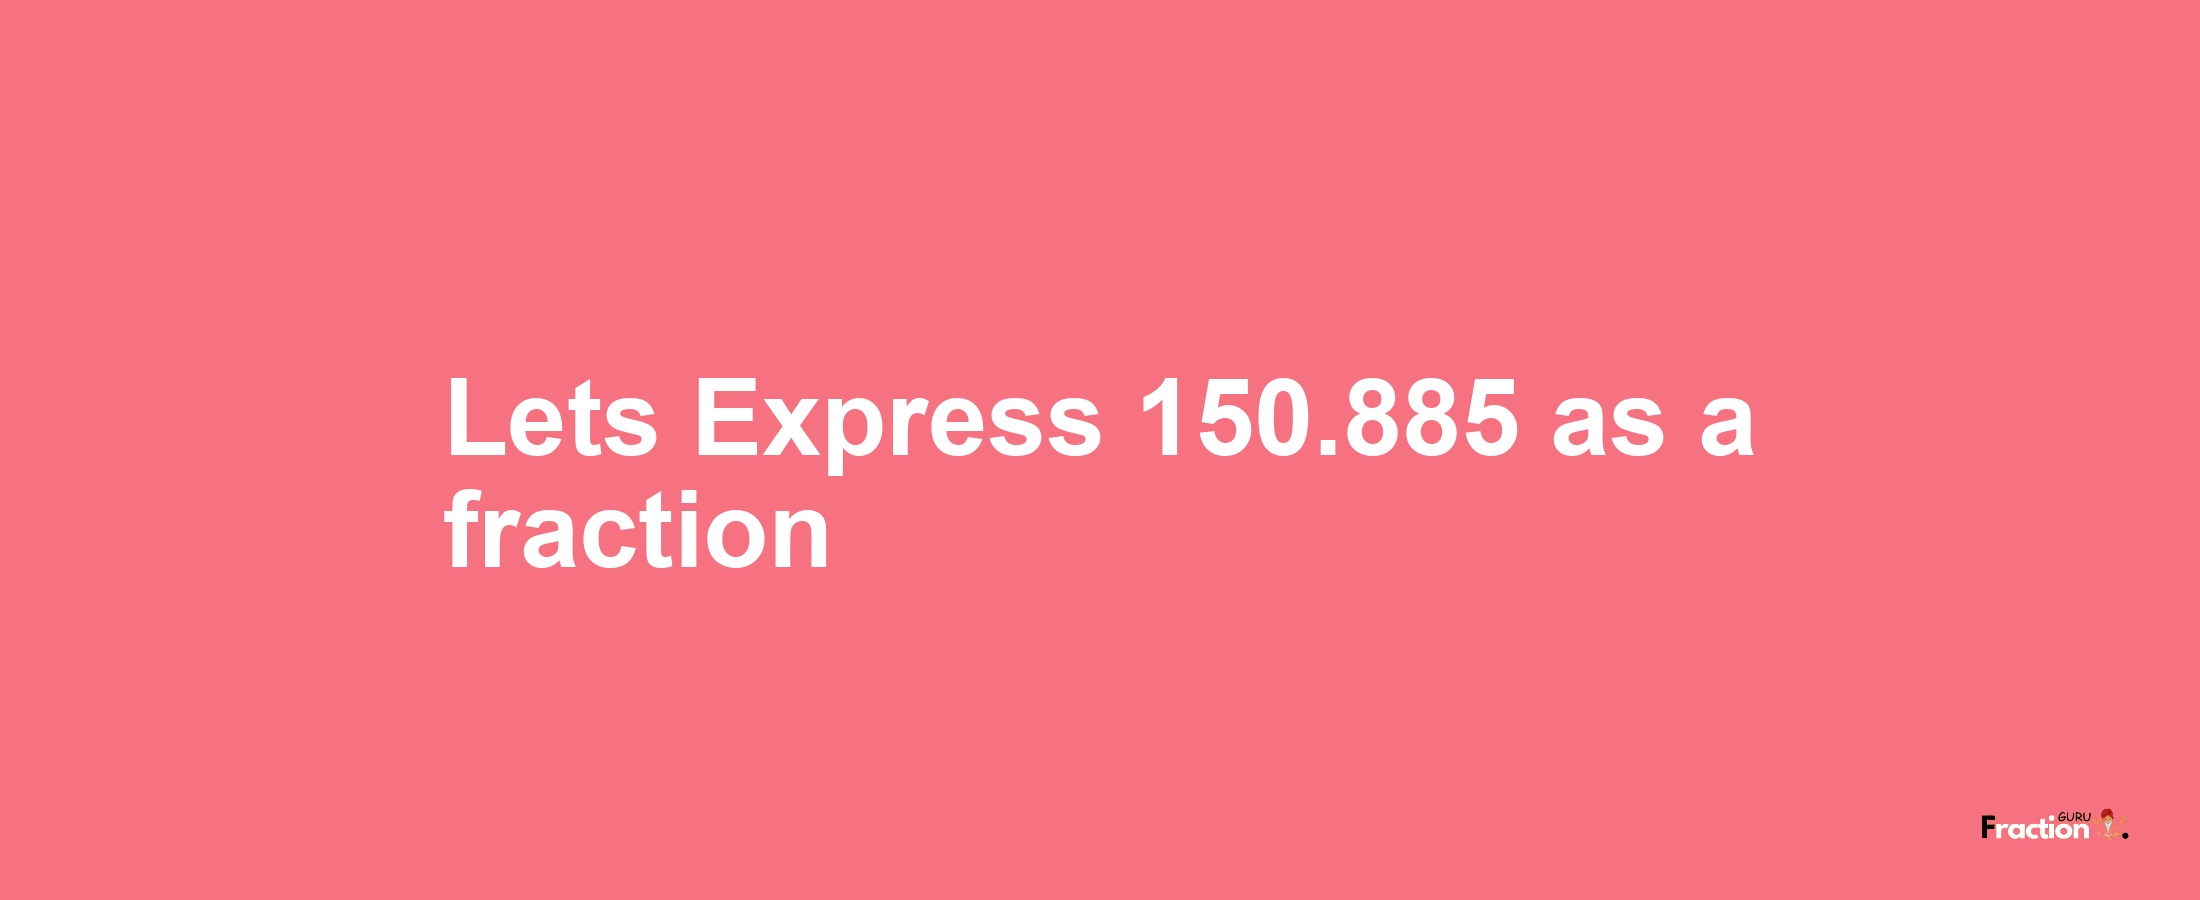 Lets Express 150.885 as afraction